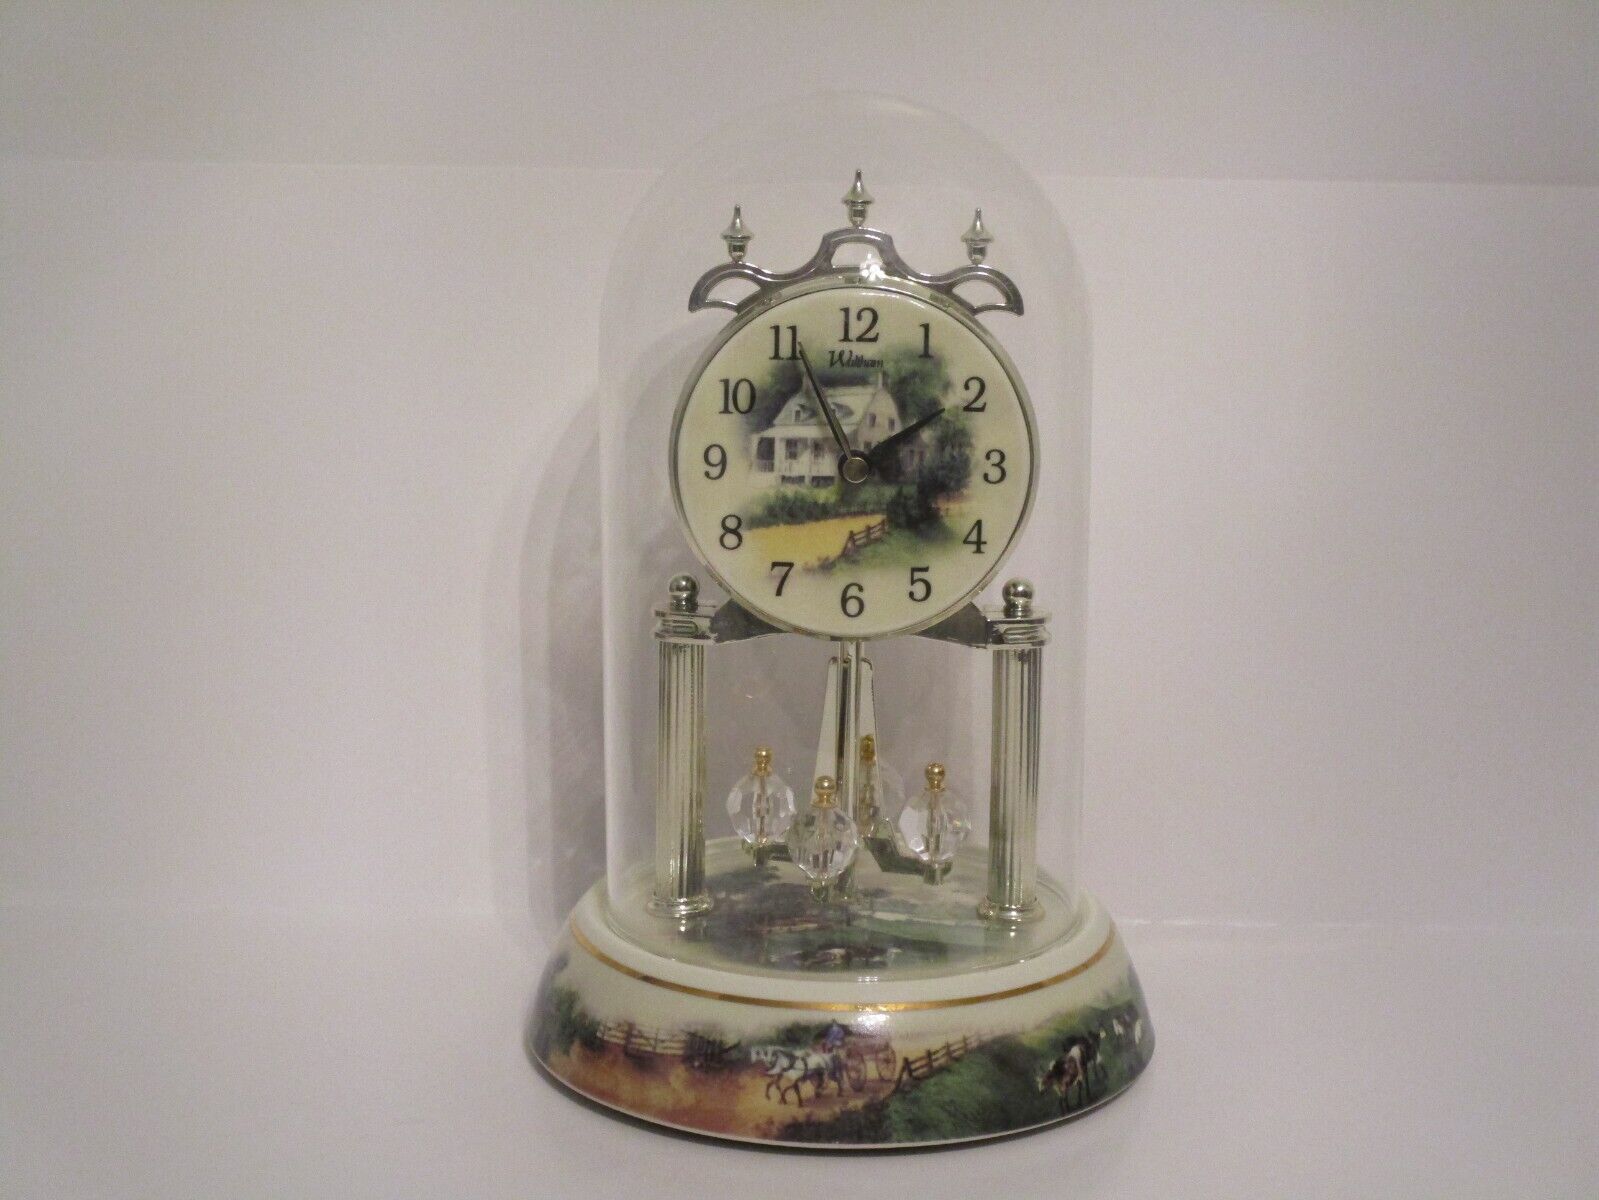 Vintage Waltham Anniversary Clock with Glass Dome works battery operated